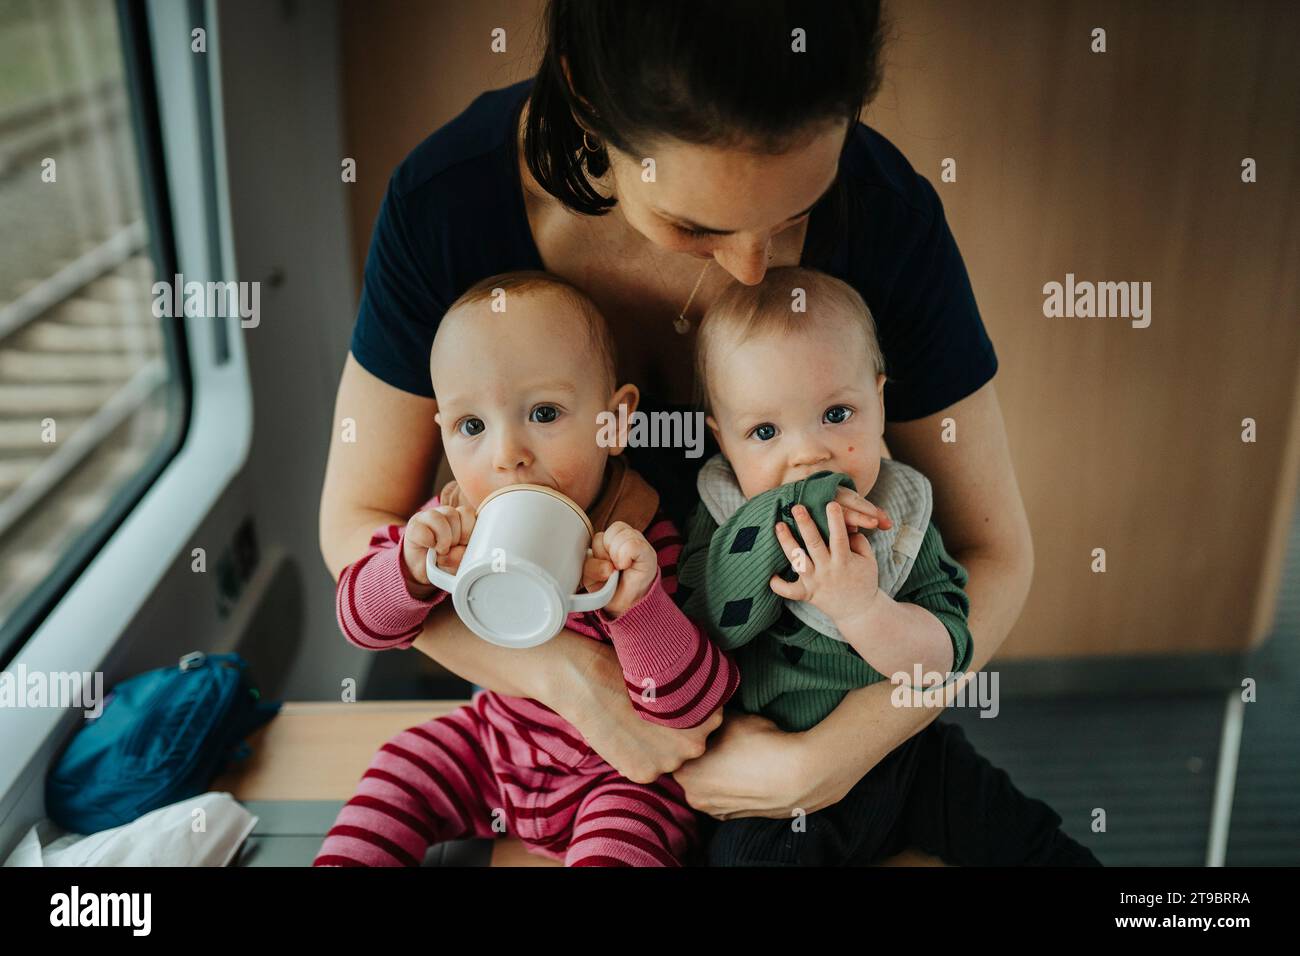 Mother embracing twin babies at home Stock Photo